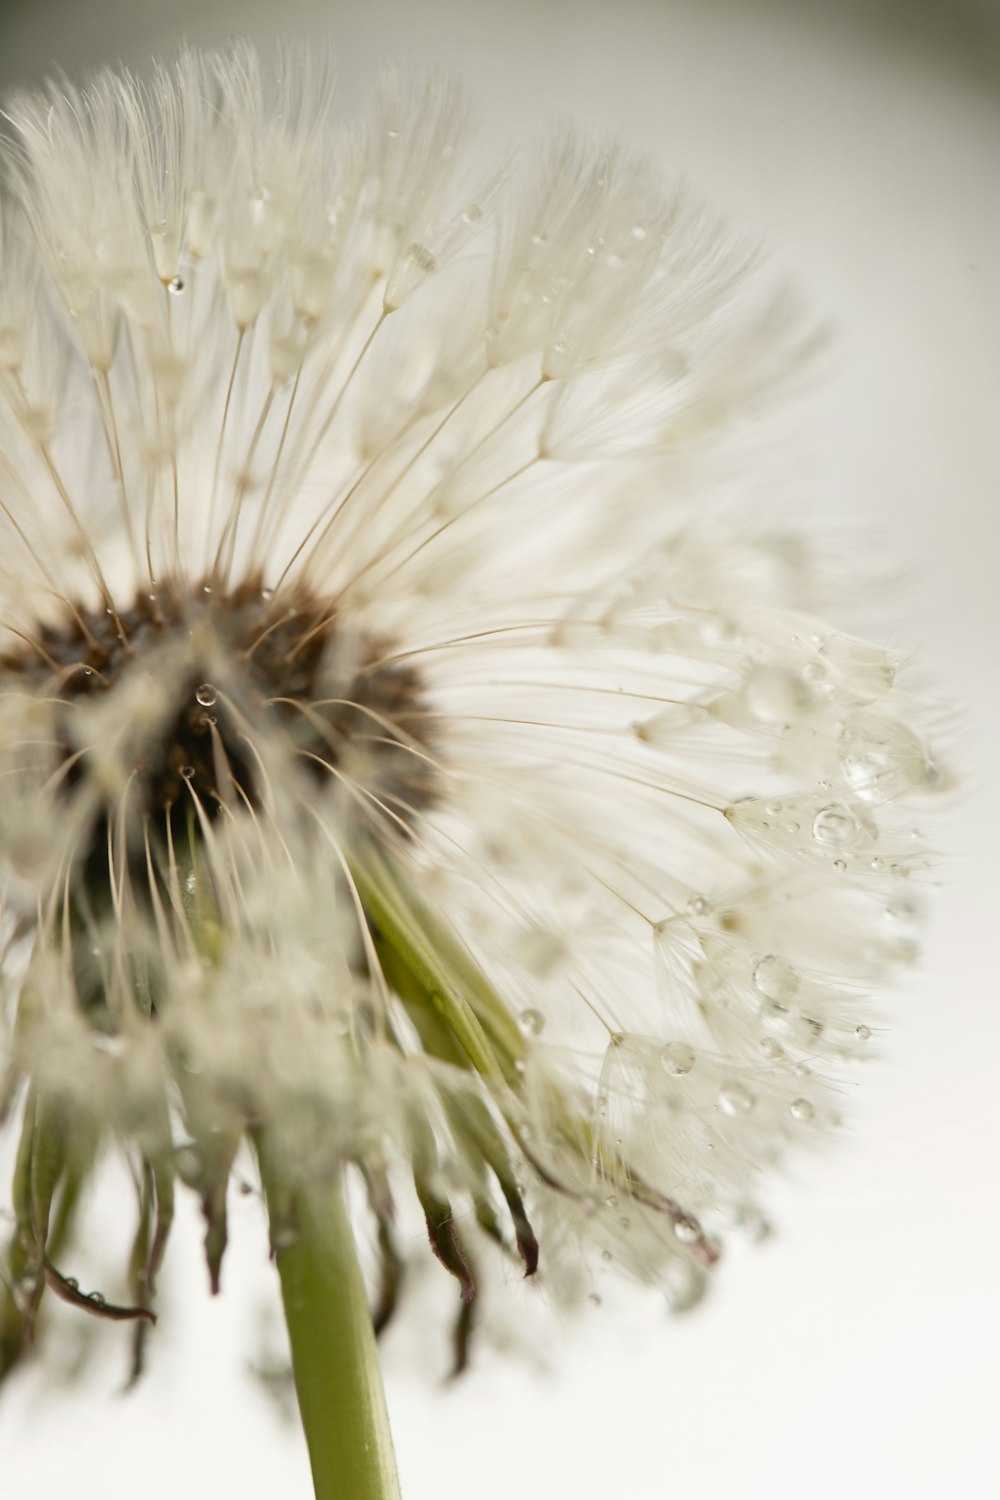 a dandelion with drops of water on it